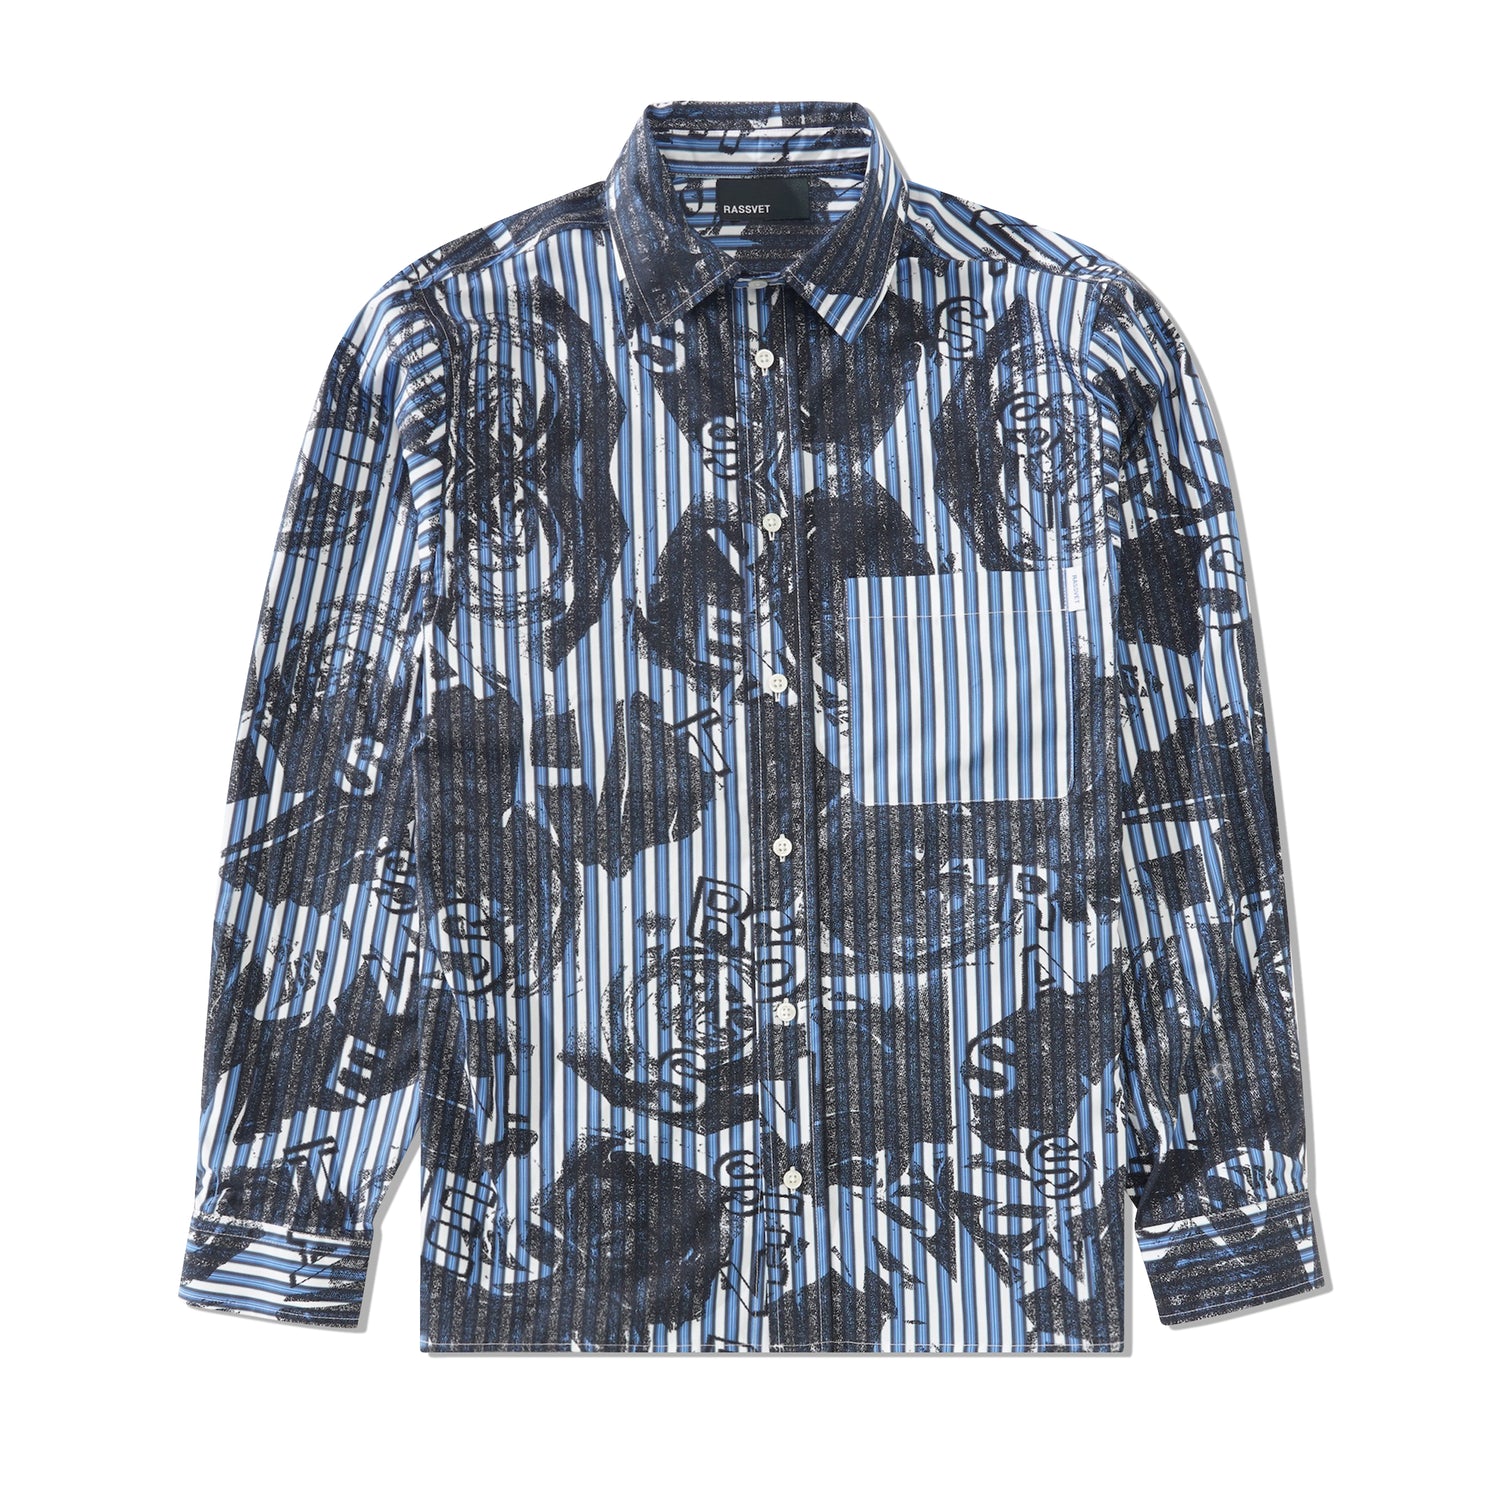 Roses All Over Print Shirt, Blue